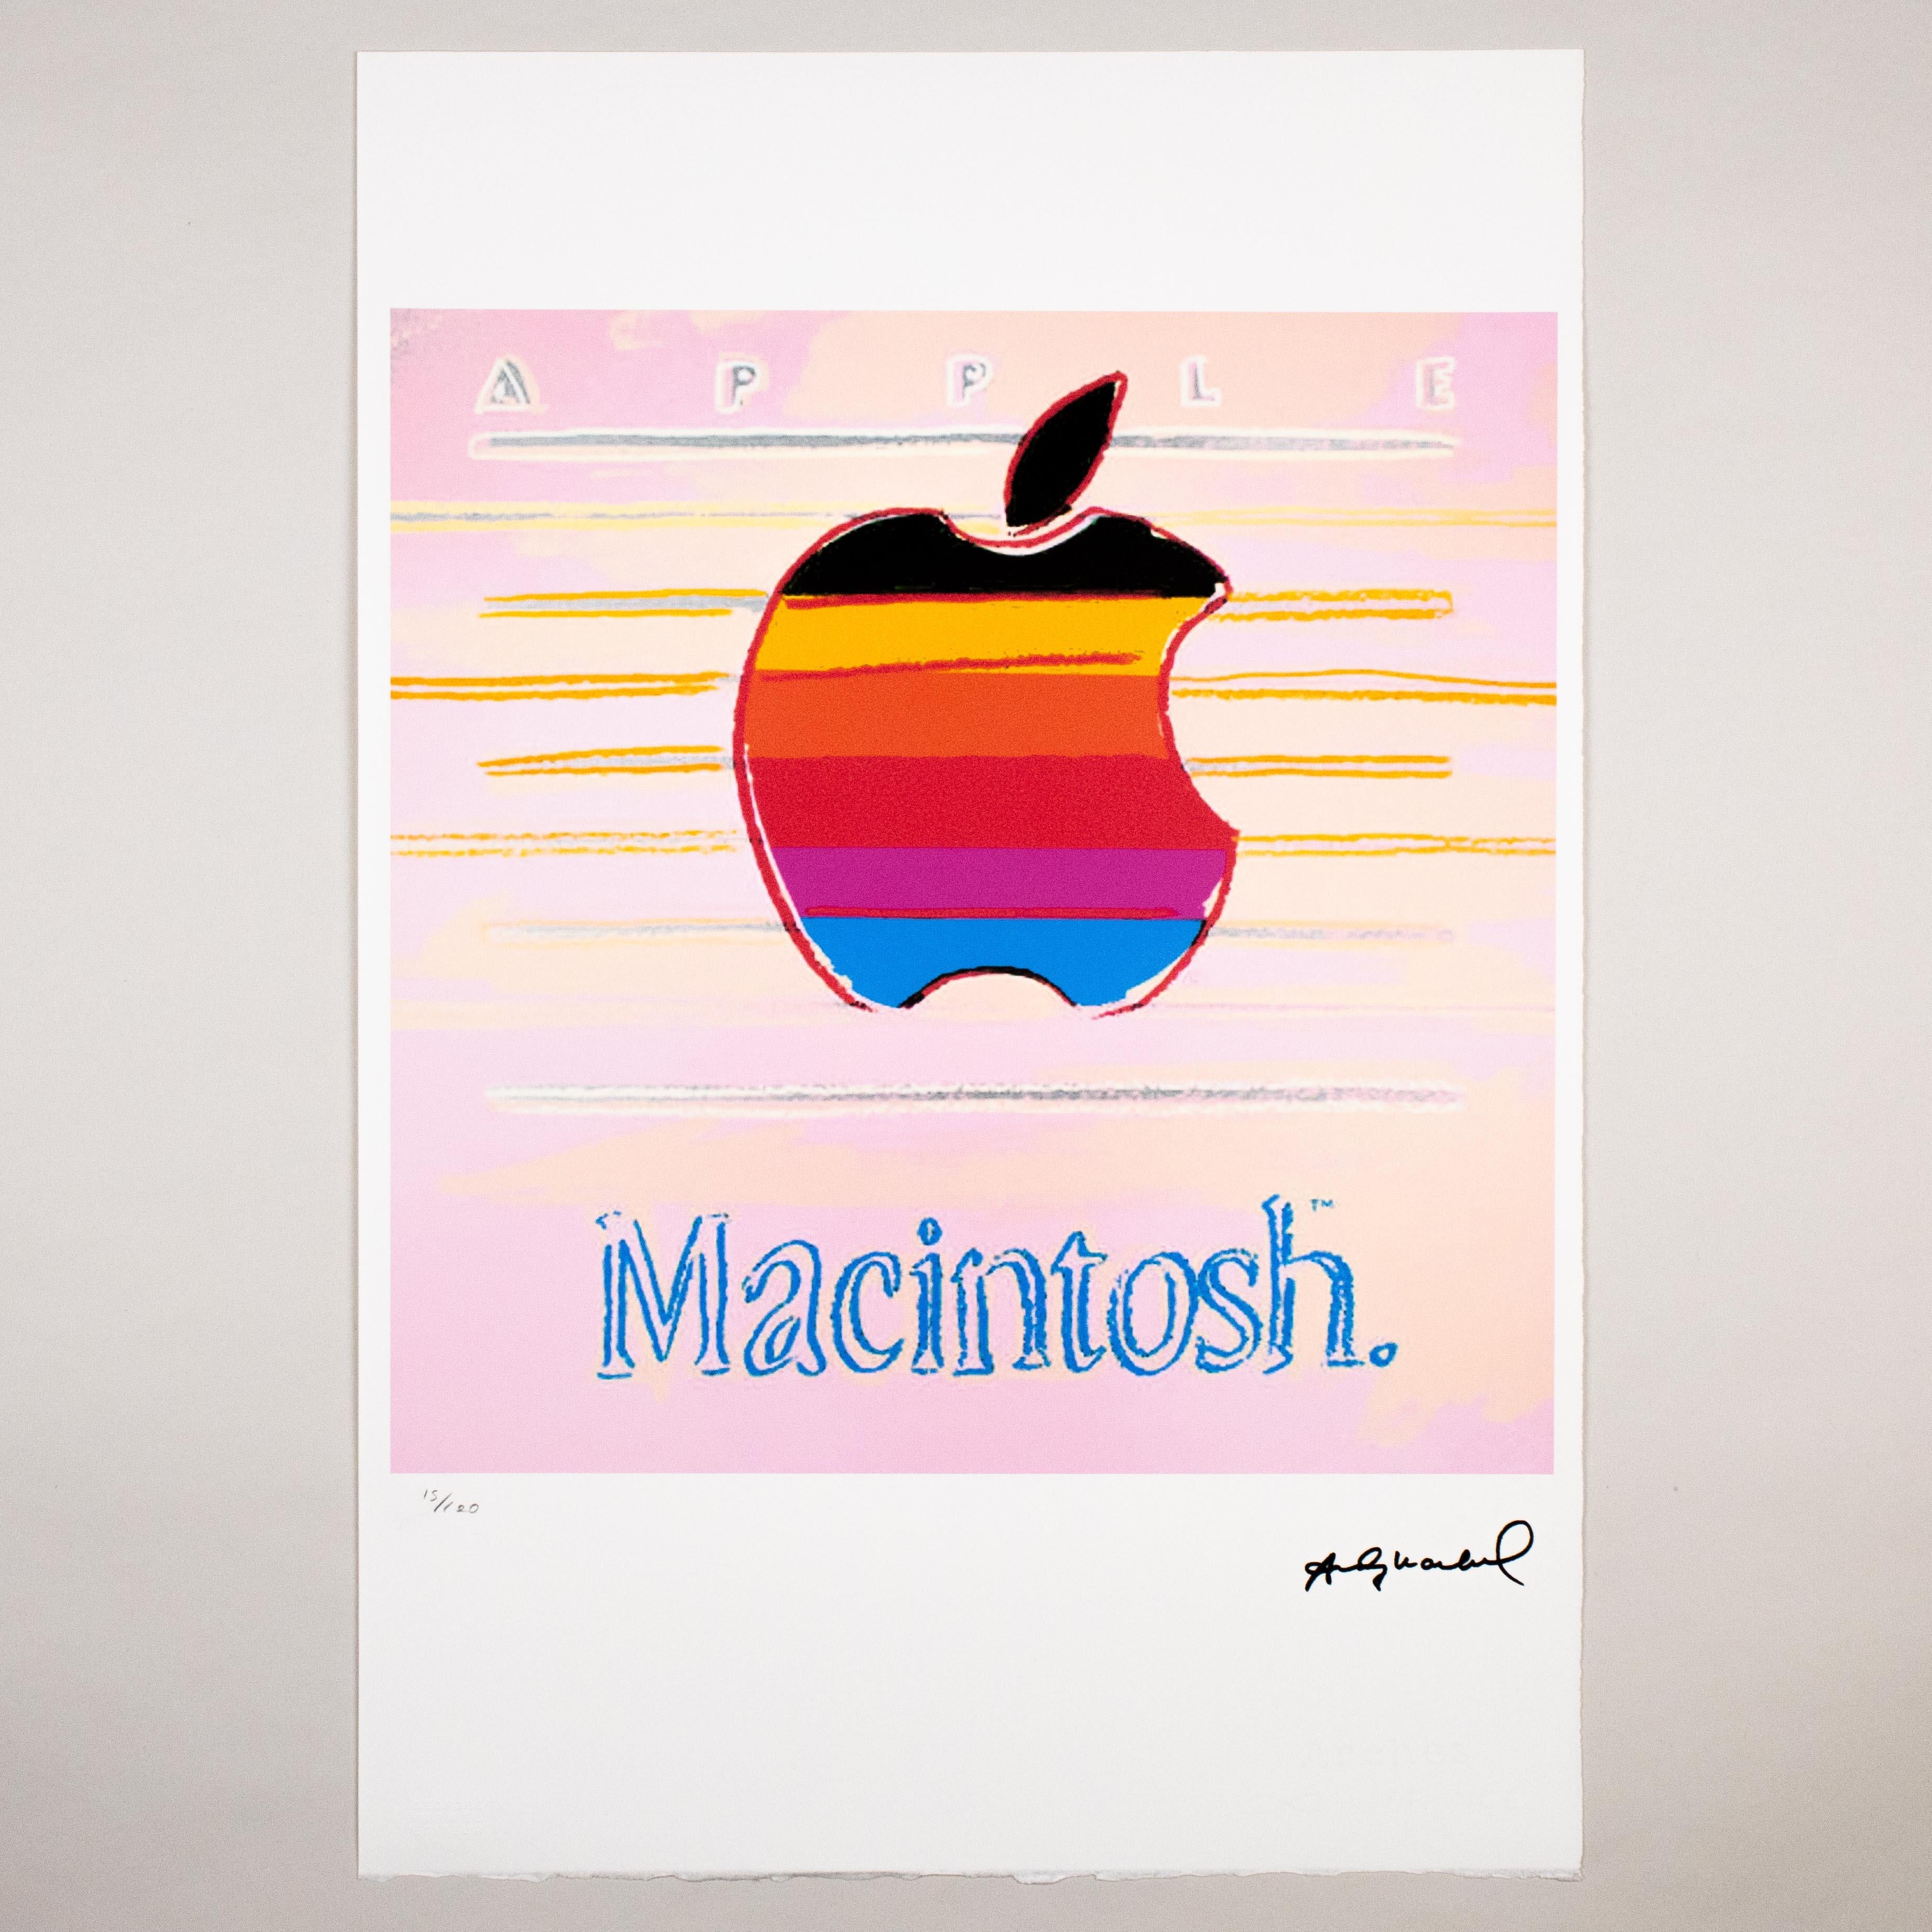 ANDY WARHOL – Apple Macintosh
Rare and limited 1980s edition by Georges Israel Editeur Paris/Leo Castelli New York

Only 100 copies total (here 15/100).
Original lithograph on handmade Arches paper incl. watermark.

Signed in plate.
Edition hand